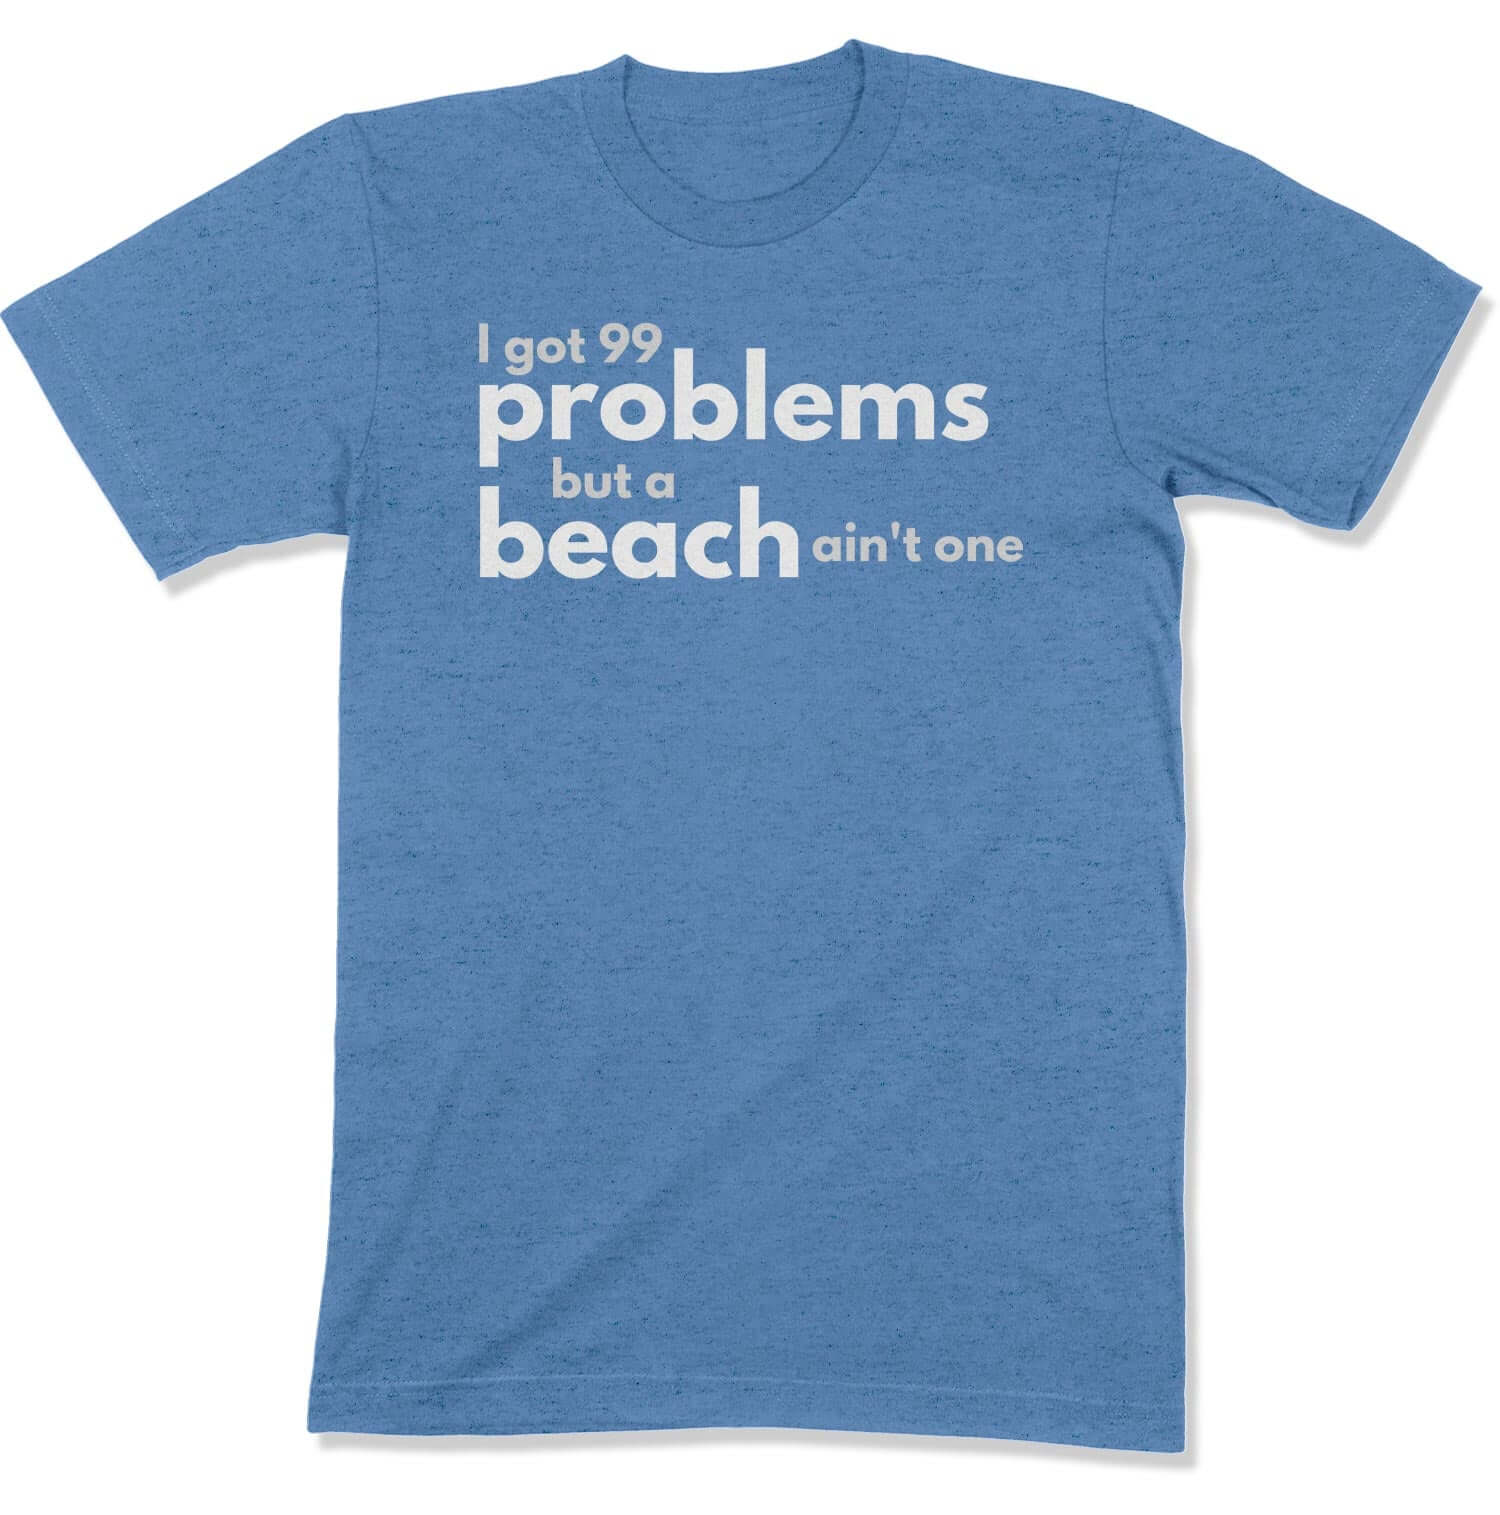 99 Problems Unisex T-Shirt in Color: Heather Columbia Blue - East Coast AF Apparel